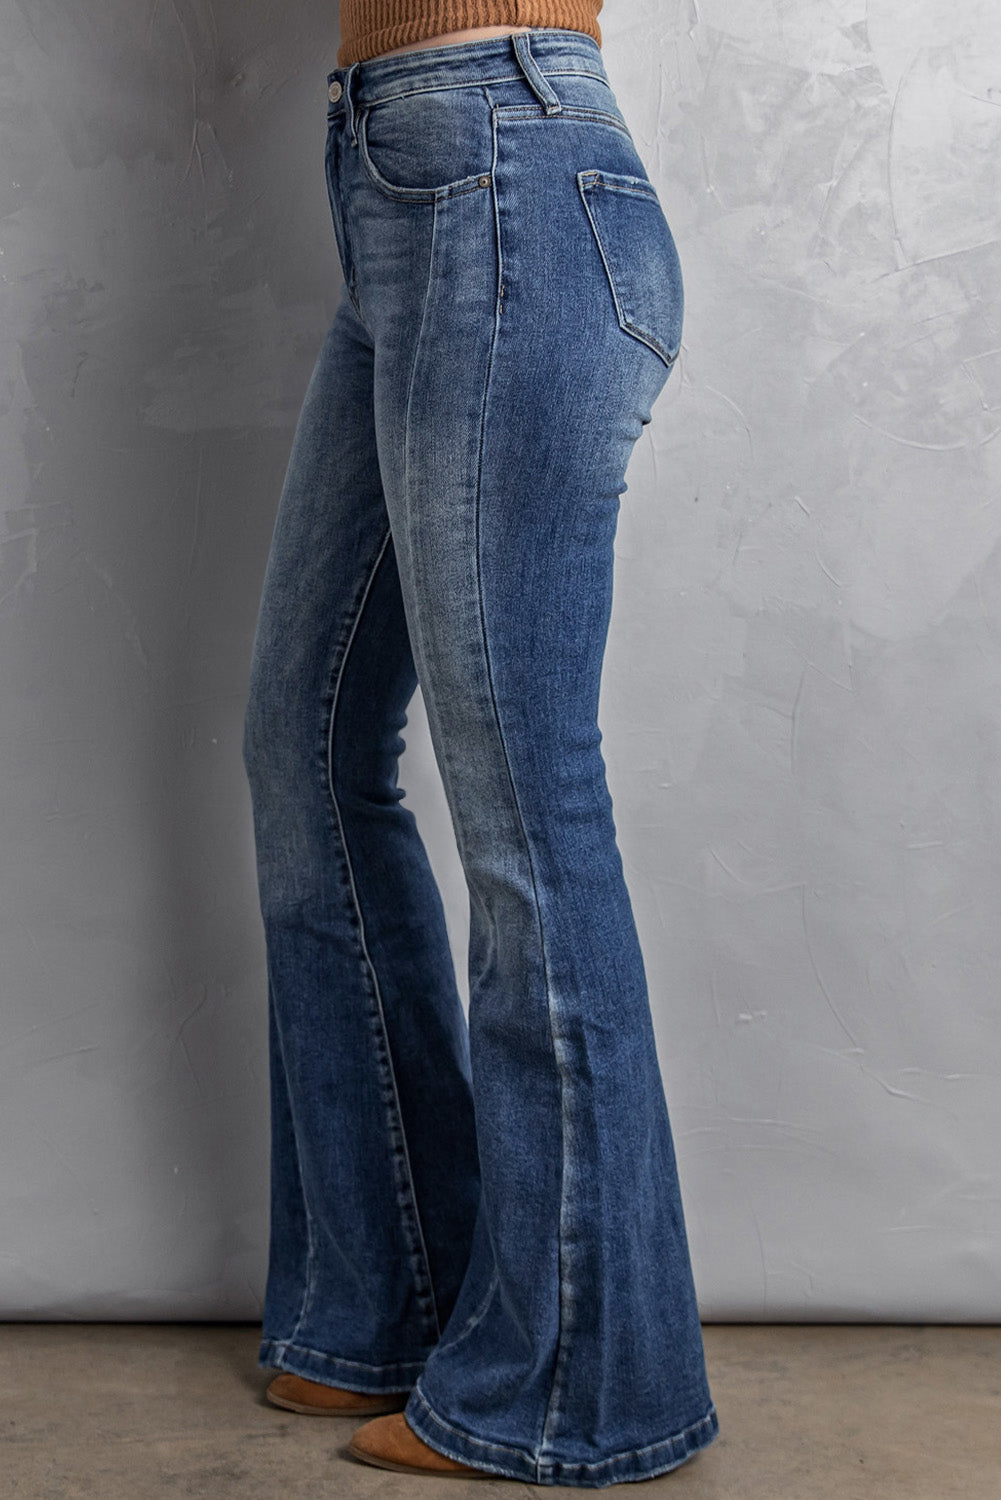 Blue Casual Pockets Chic High Waist Flare Jeans